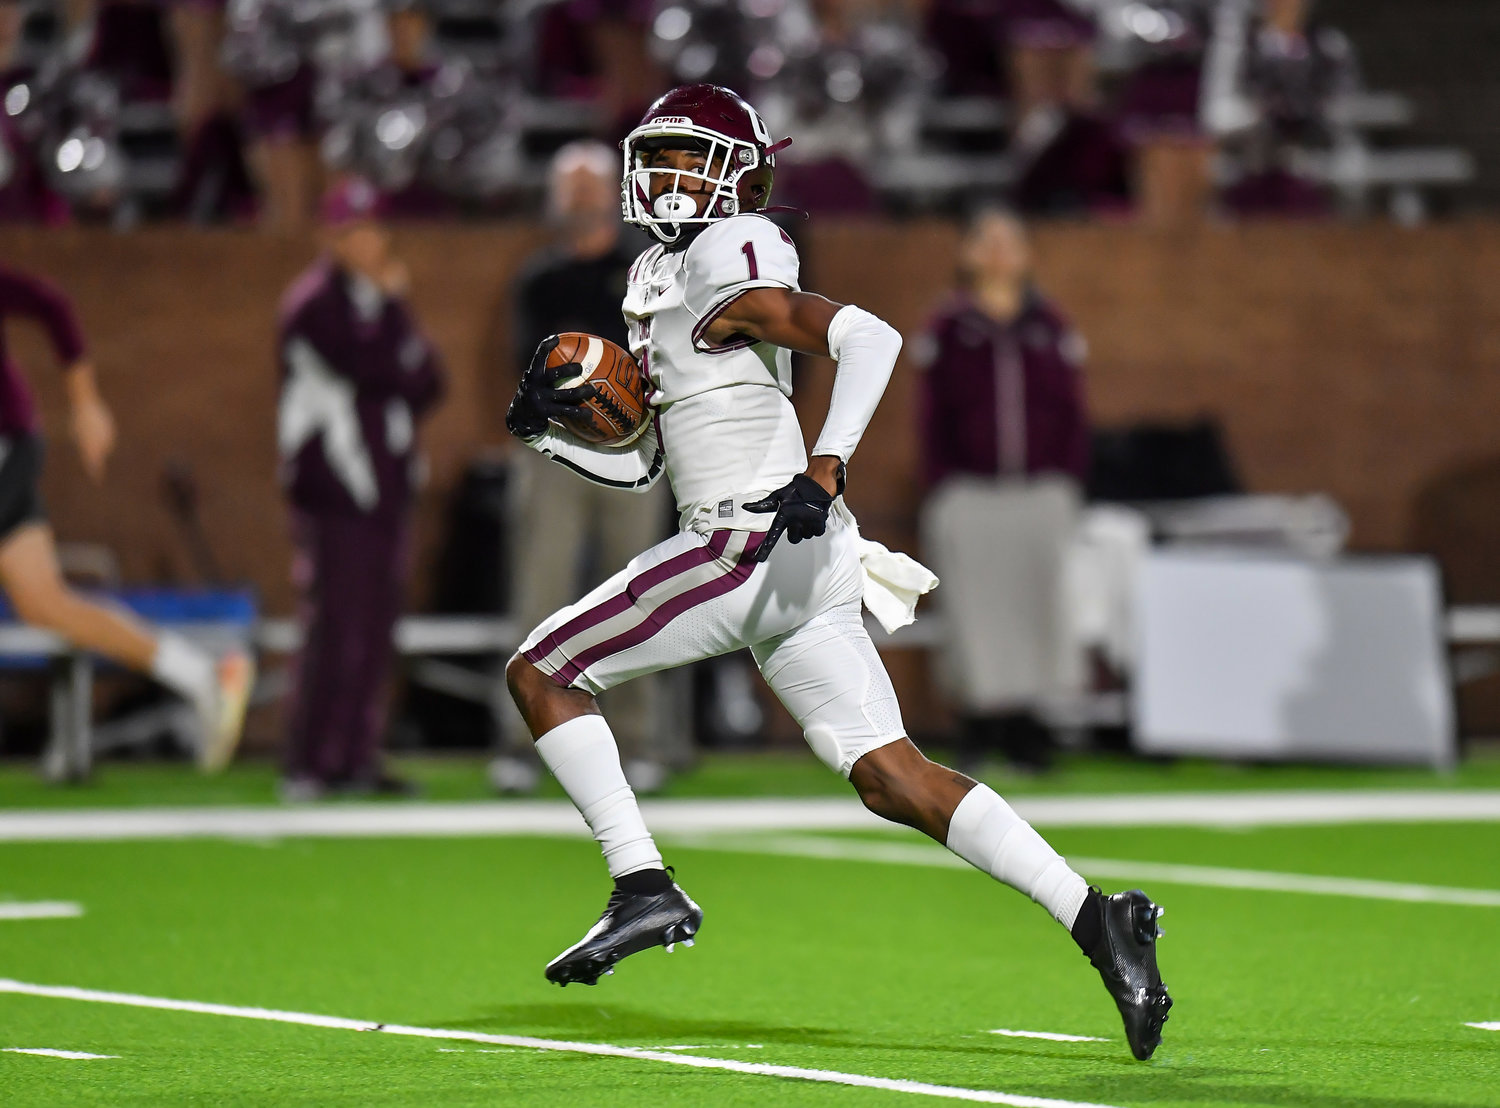 Katy, Tx. Oct. 29, 2021: Cinco Ranch's Grayson Williams #1 carries the ball scoring a TD during the first quarter of a conference game between Cinco Ranch and Morton Ranch at Rhodes Stadium in Katy. (Photo by Mark Goodman / Katy Times)